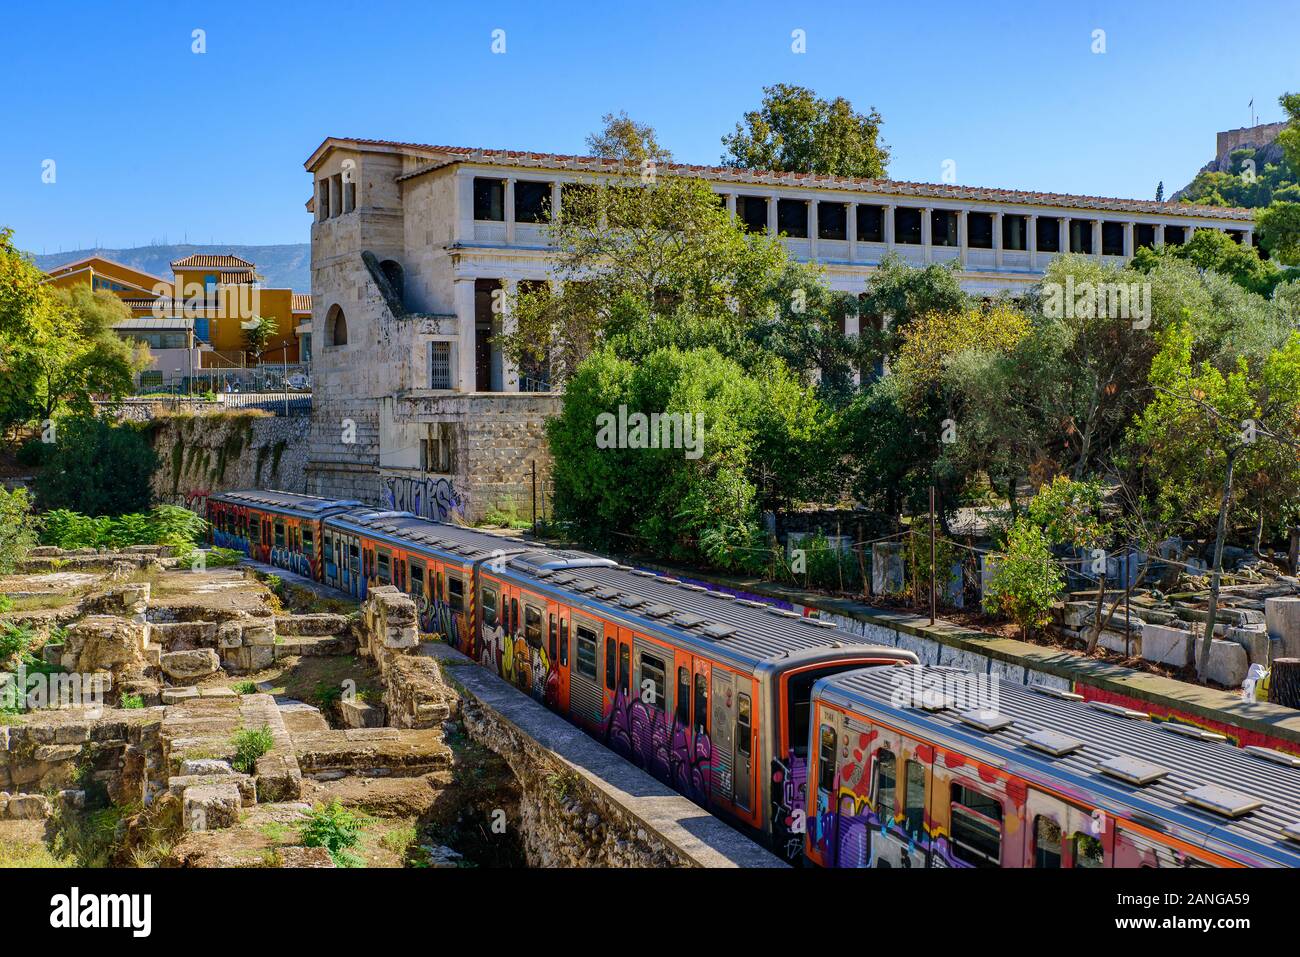 Train running in the city of Athens, Greece Stock Photo